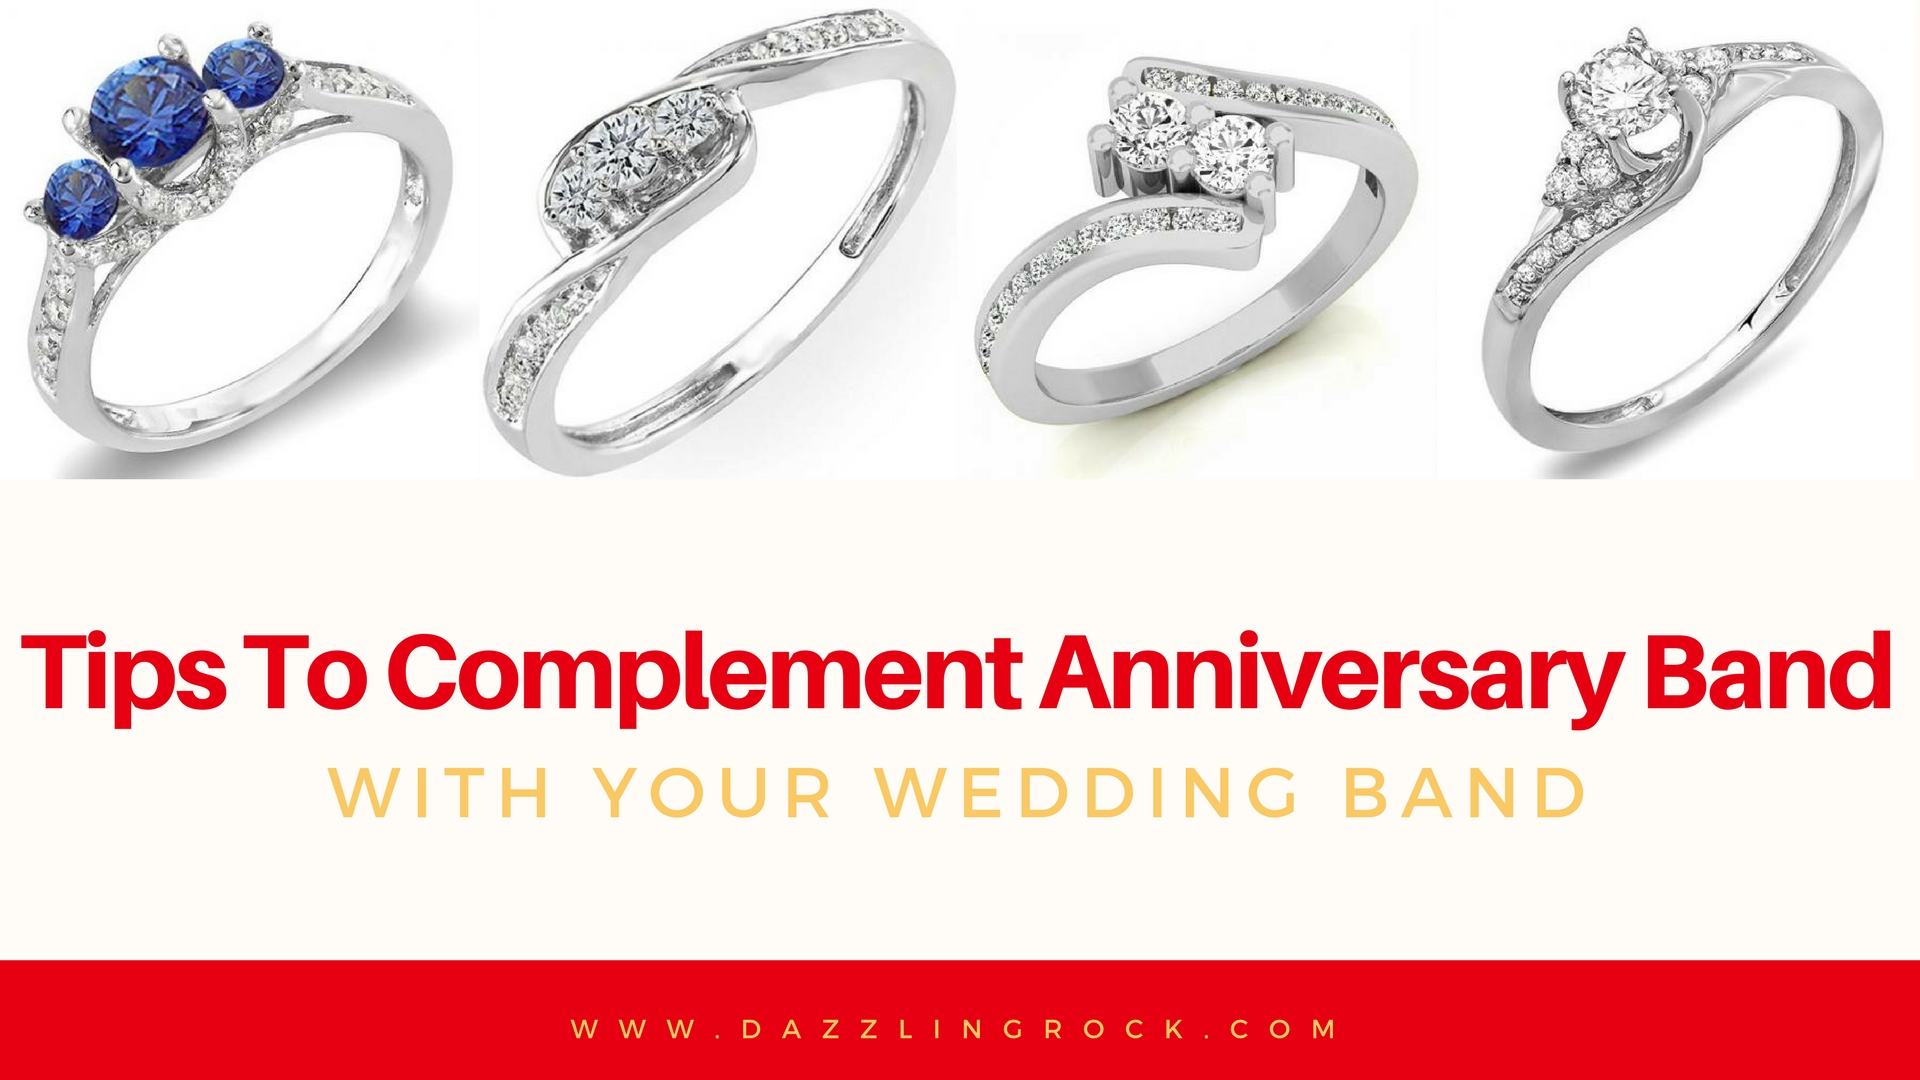 Tips To Complement Anniversary Band With Your Wedding Band - Dazzling Rock